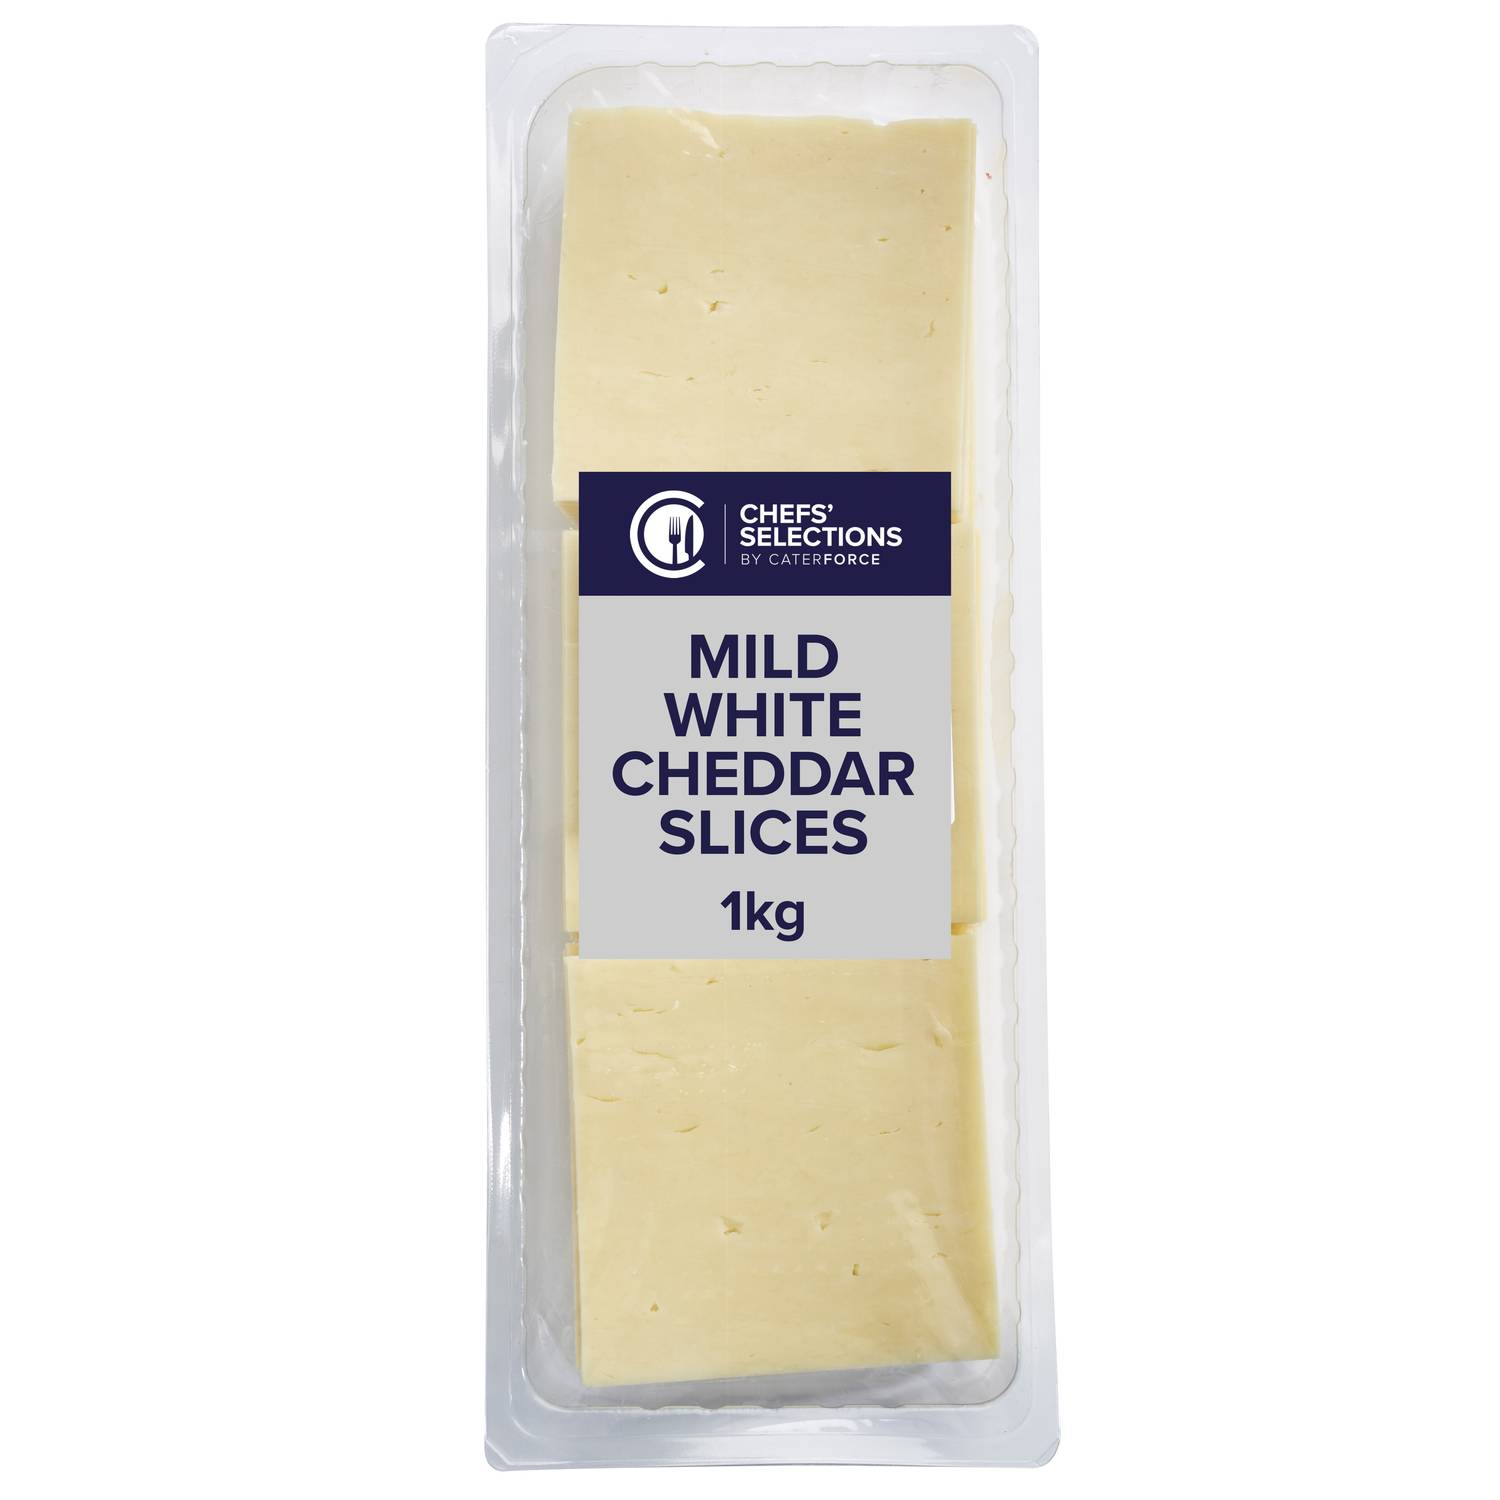 Chefs’ Selections Mild White Cheddar Cheese Slices (6 x 1kg)